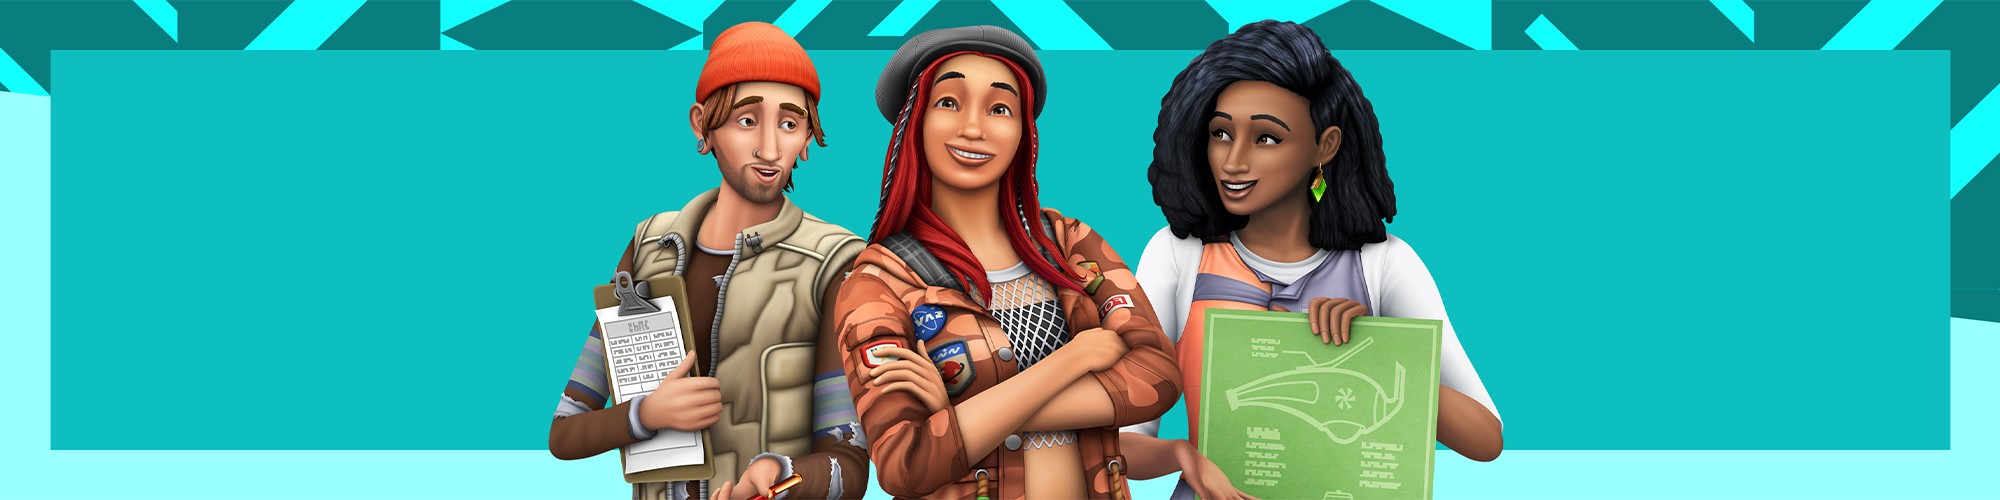 The sims 4 strangerville free download mac